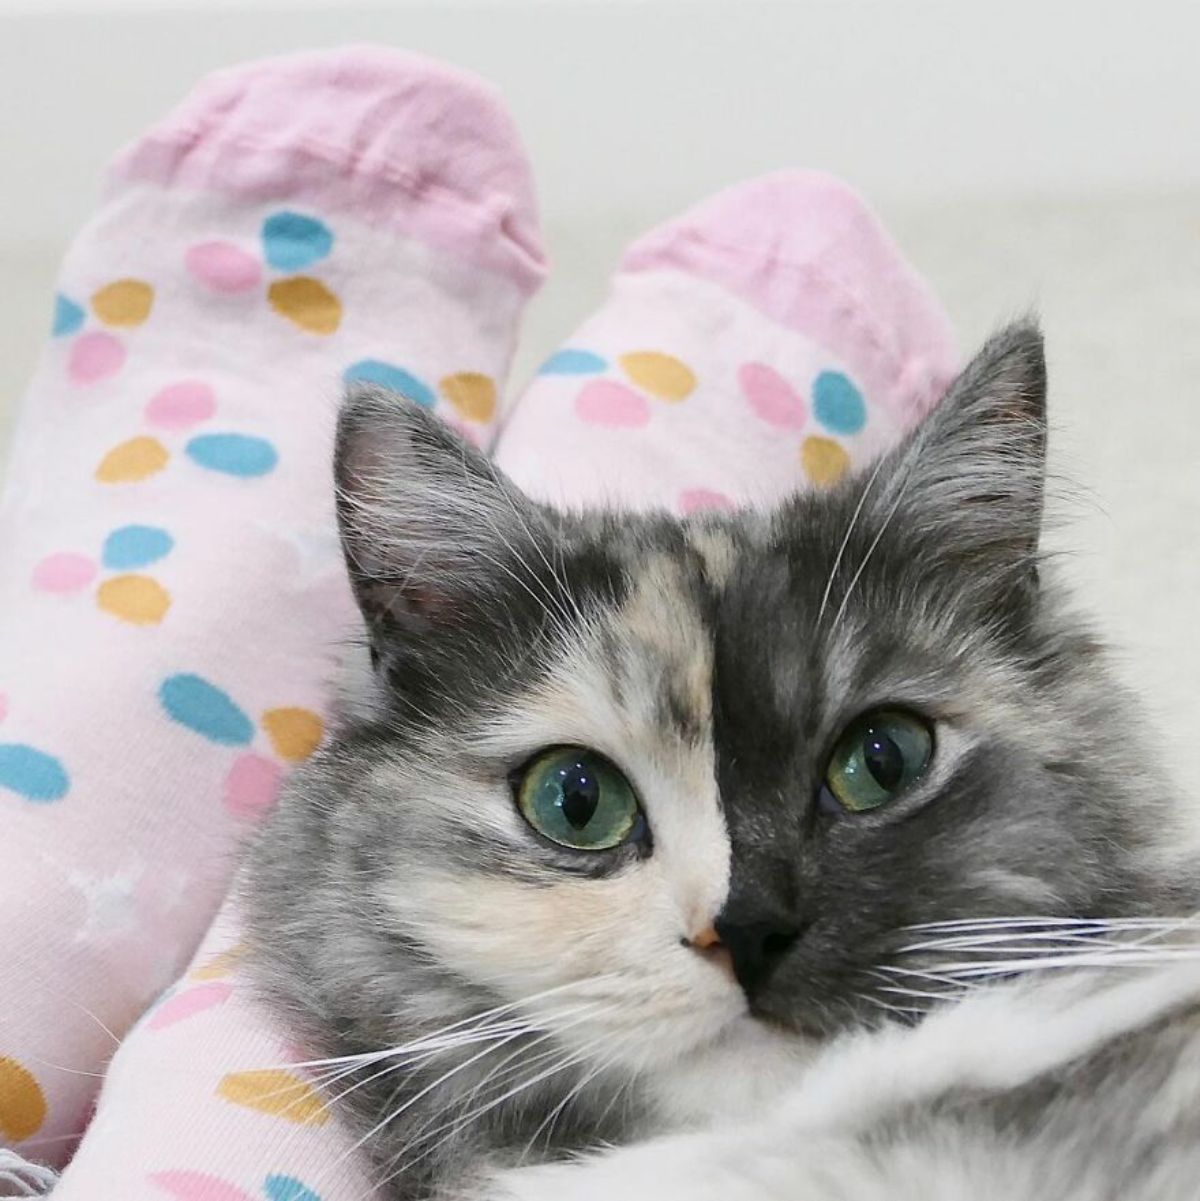 fluffy cat with right side of face being grey and left side being black leaning against someone's feet in pink socks